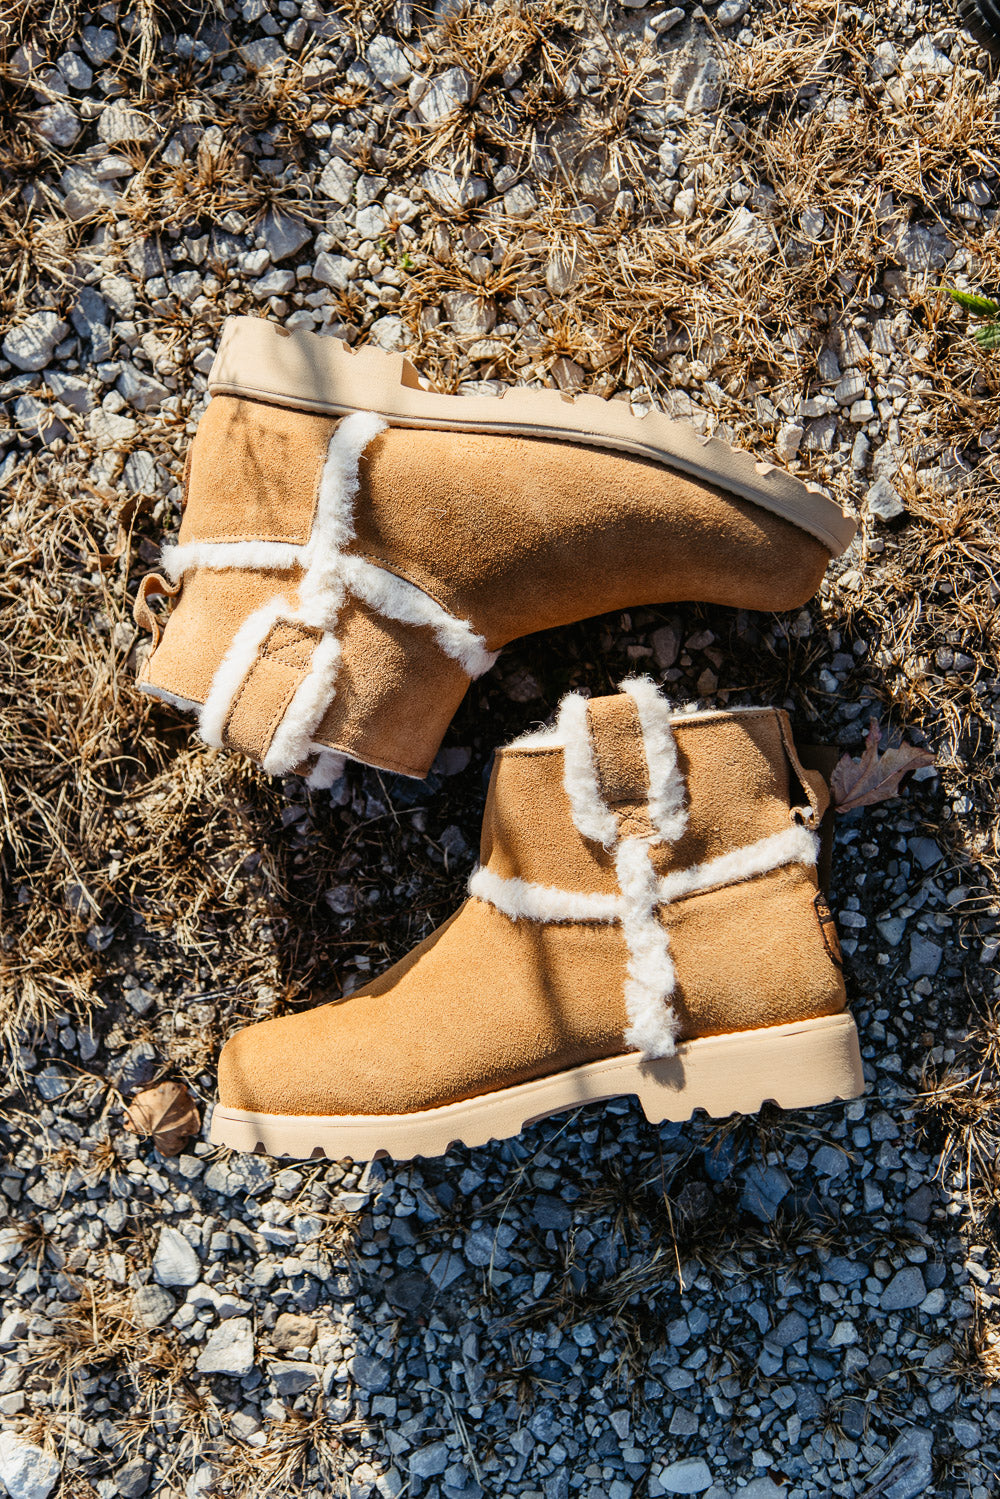 BEARPAW - 1 part warm boot + 1 part cozy sock = perfectly cozy.